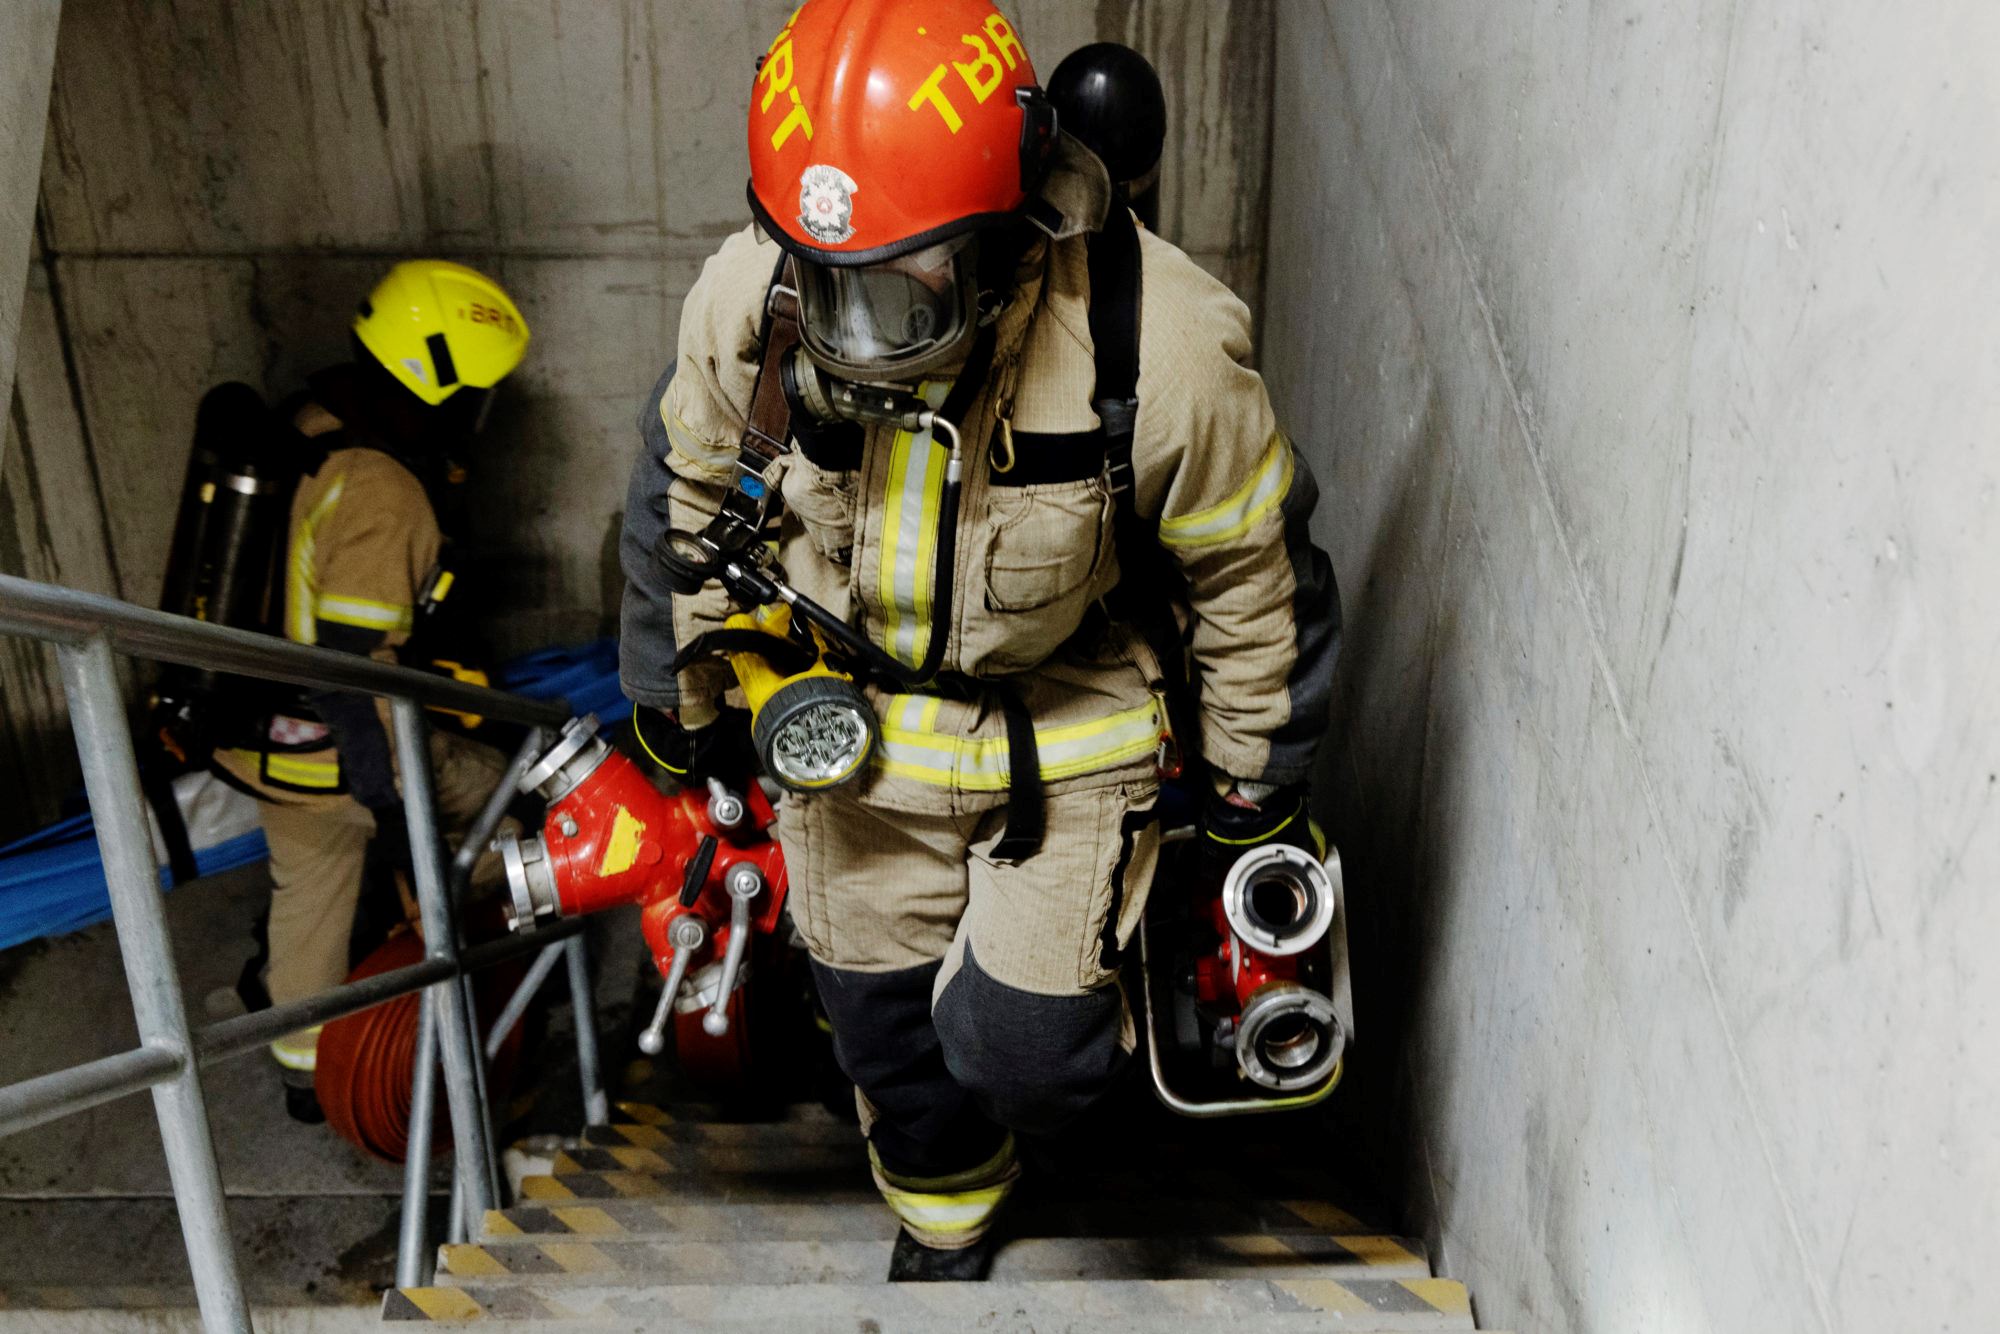 Firefighters from the TBRT fire brigade in Trondheim during a training exercise.